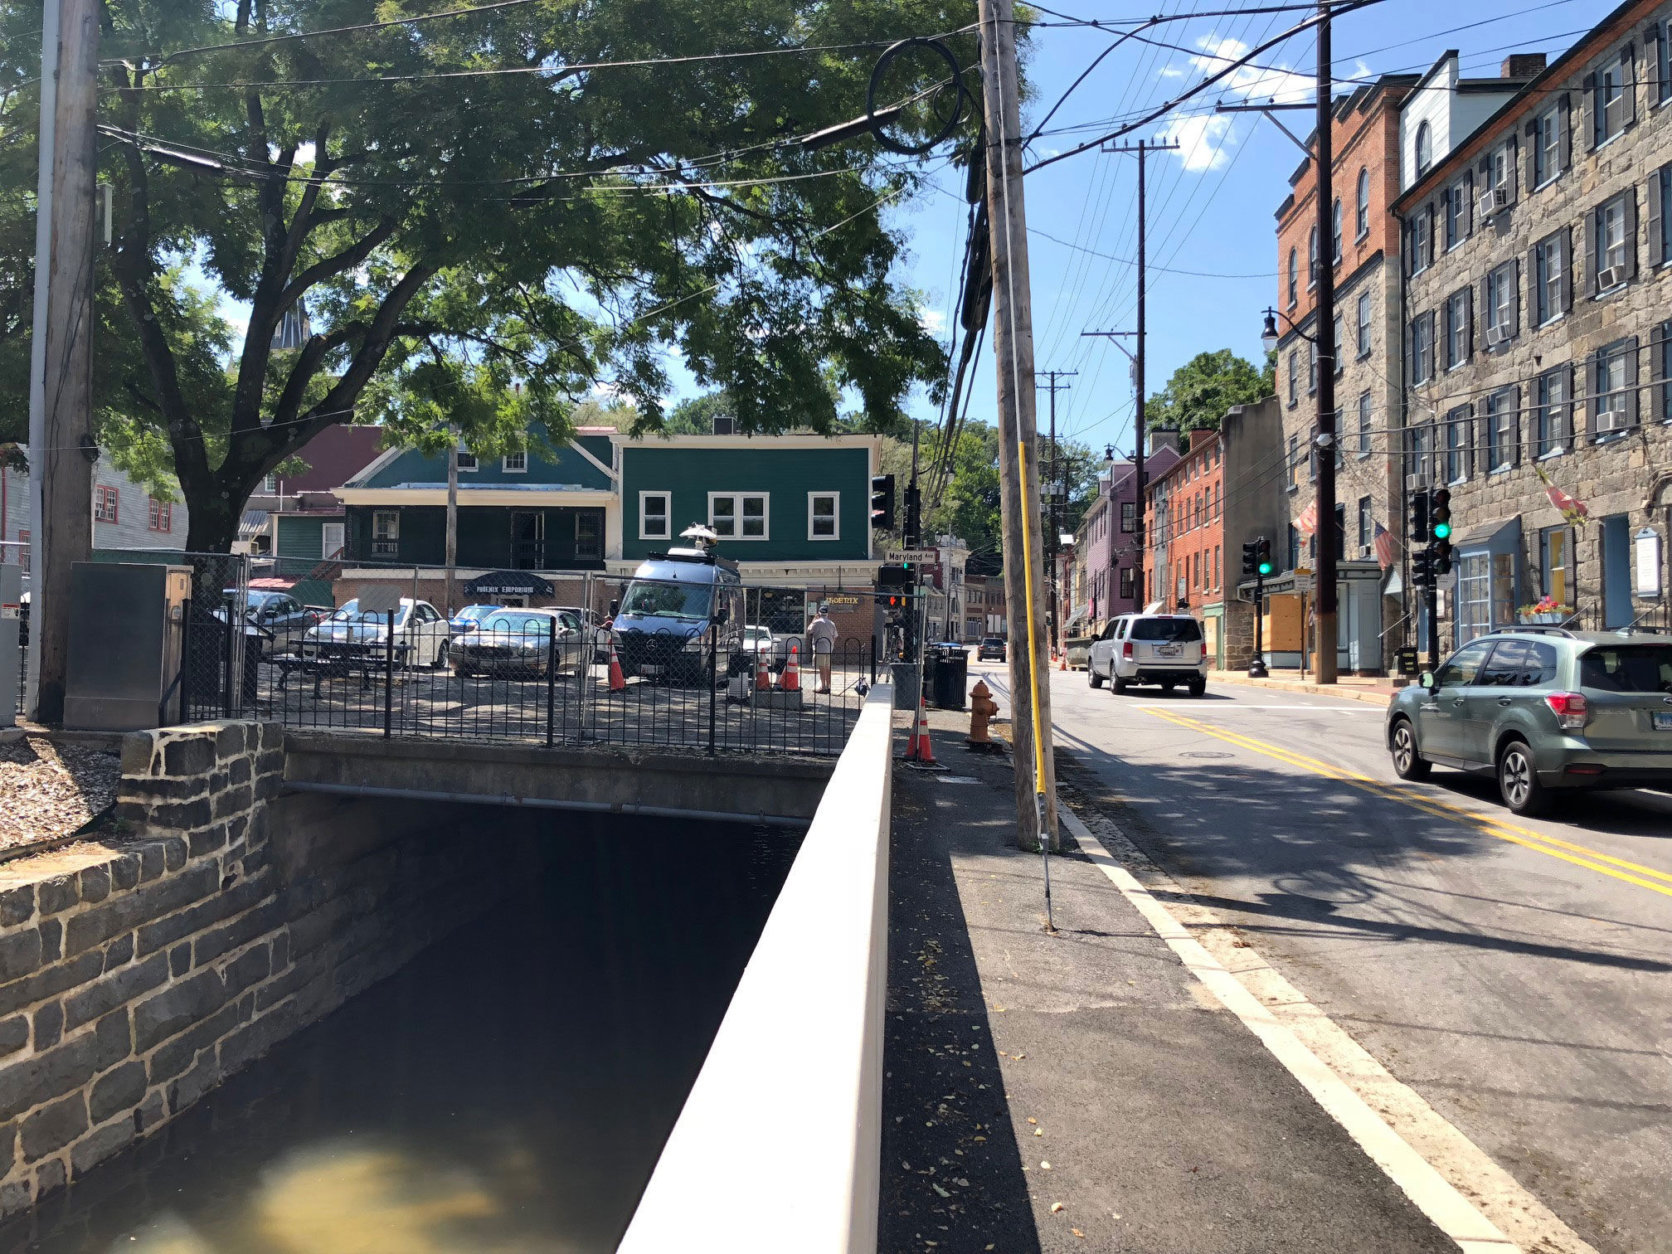 The changes in Ellicott City would not eliminate the flood risk. They aim to lessen the impact of future flooding events by reducing not only the volume of water but its destructive speed. (WTOP/John Aaron)